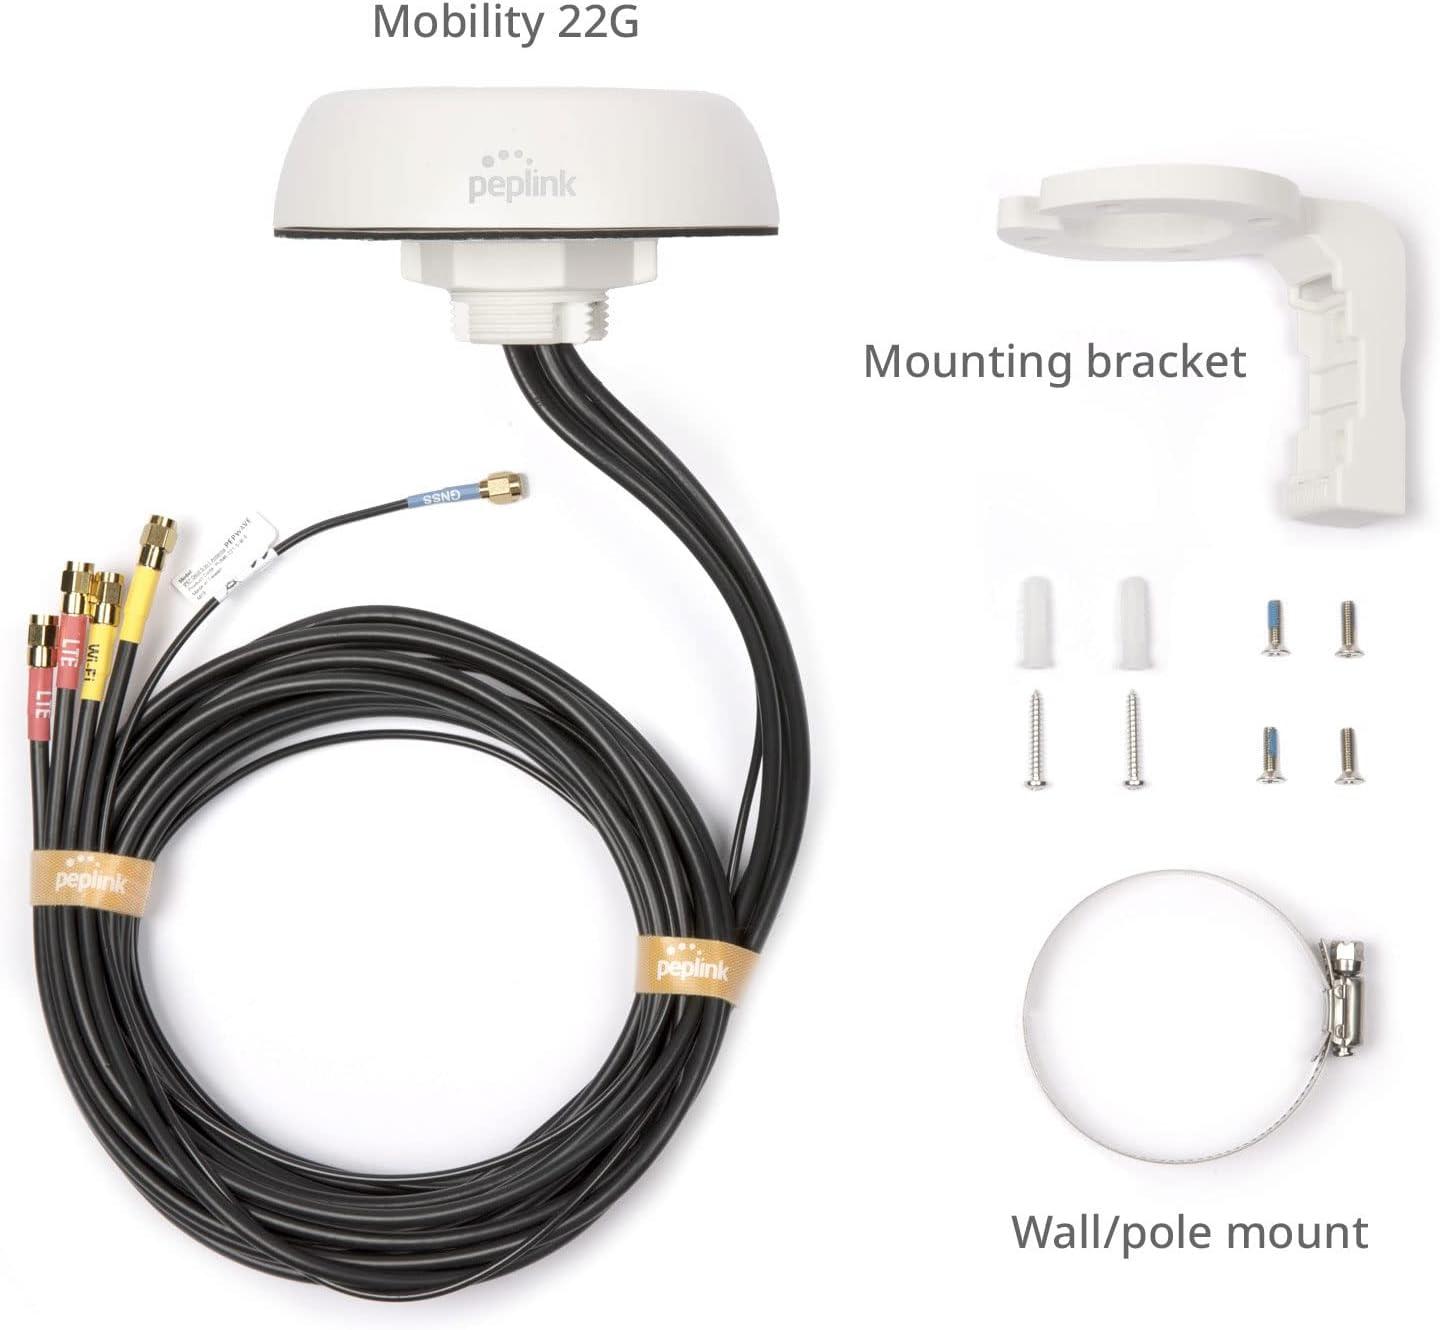 Peplink Mobility 22G 5-in-1 Cellular and Wi-Fi Antenna with GPS